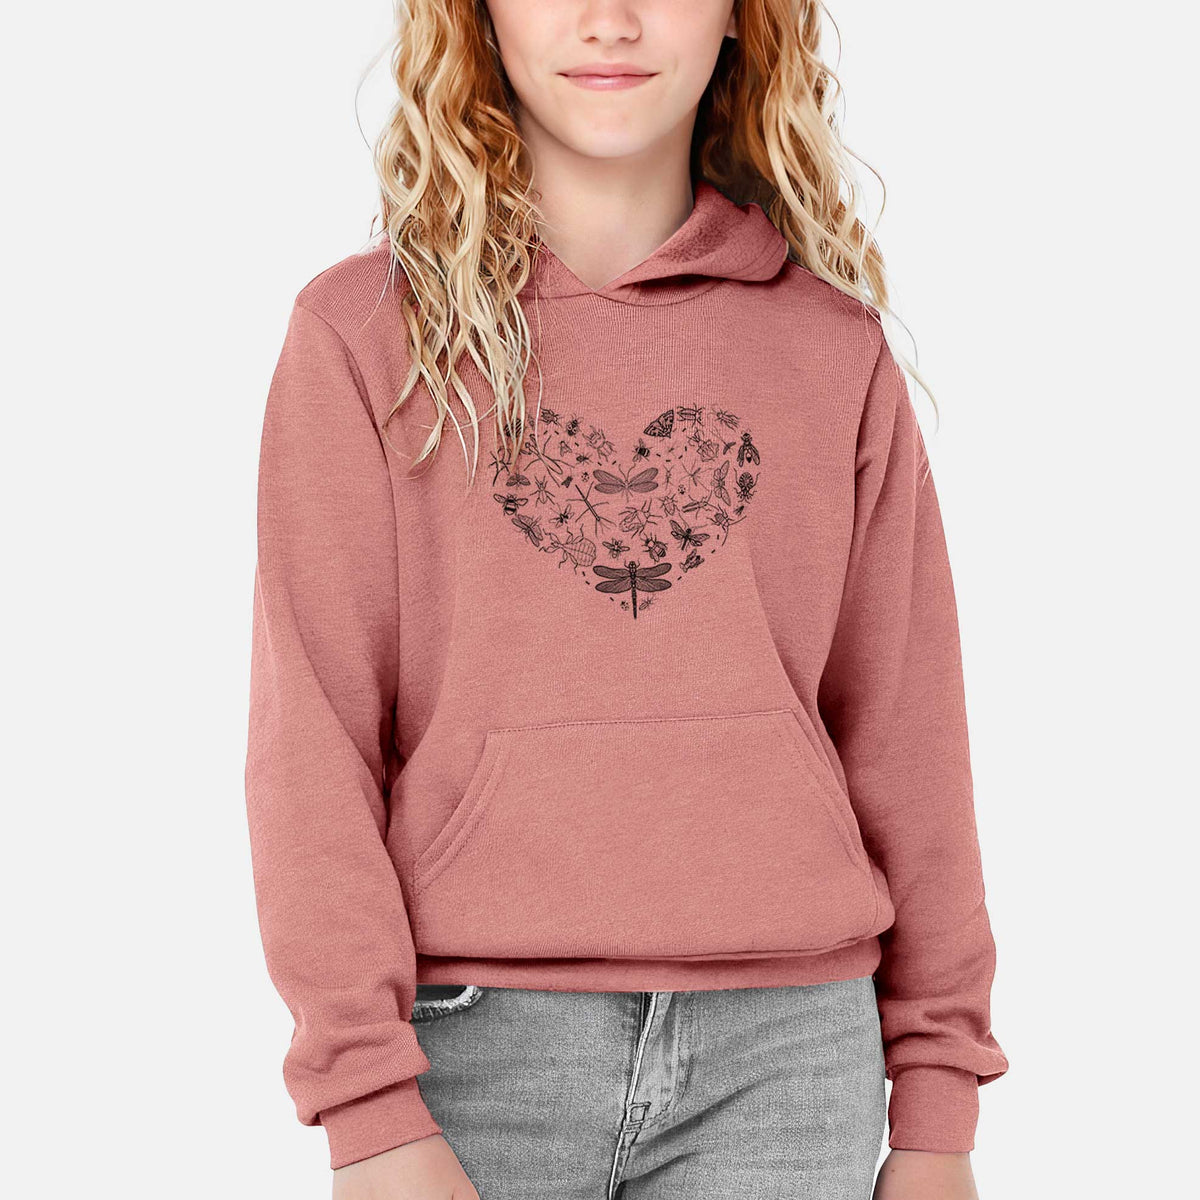 Heart Full of Insects - Youth Hoodie Sweatshirt